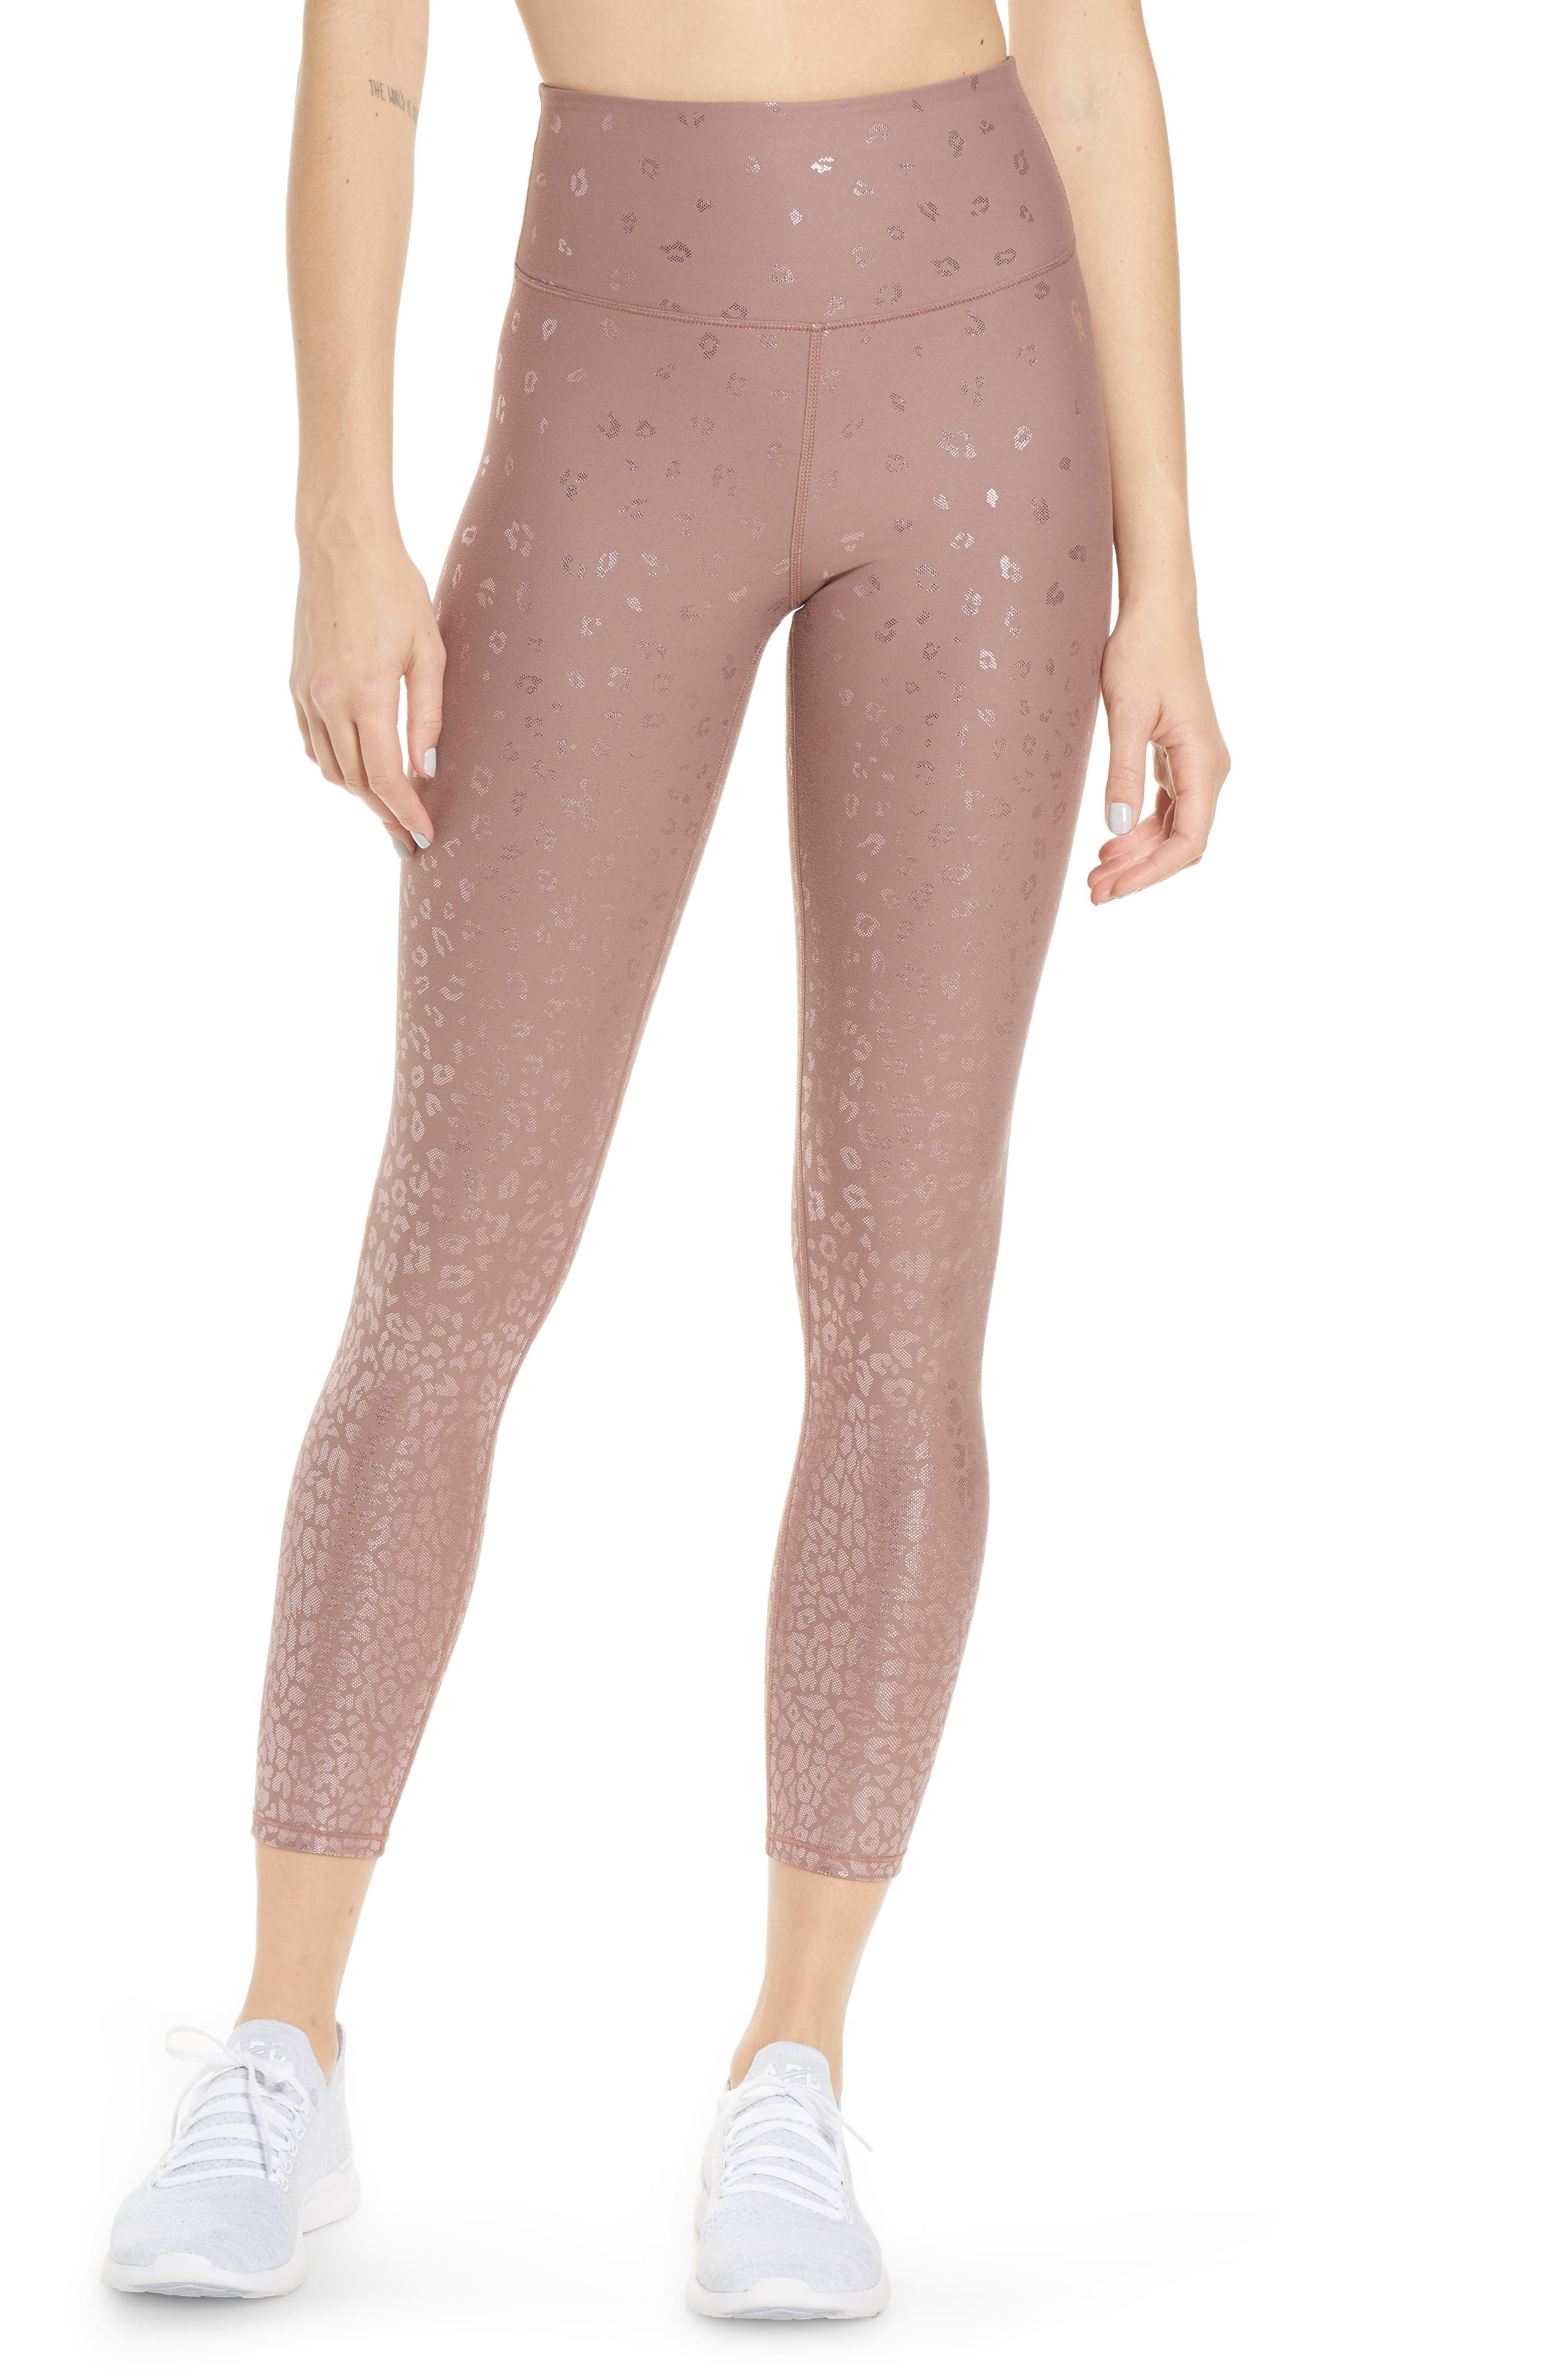 Glyder High Power Legging Print in Soft Blush/Rose Gold Triangle, $78, 12  Printed Leggings to Help You Make a Statement at the Gym - (Page 6)